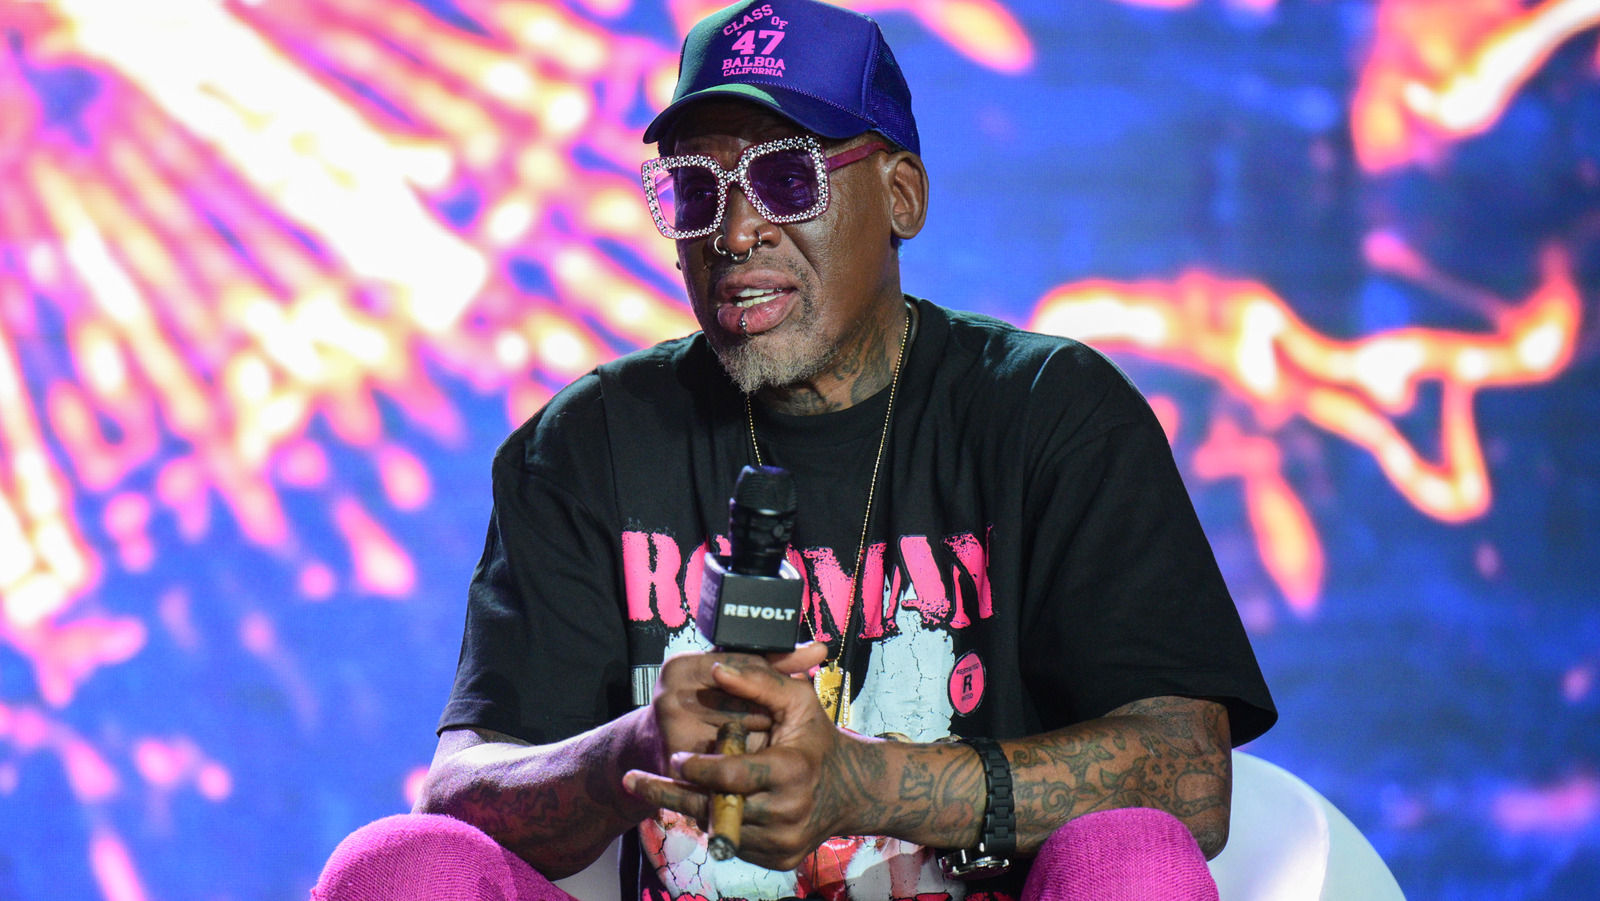 The Worm is back! Dennis Rodman returns to United Center for the first time  in 13 years for AEW appearance